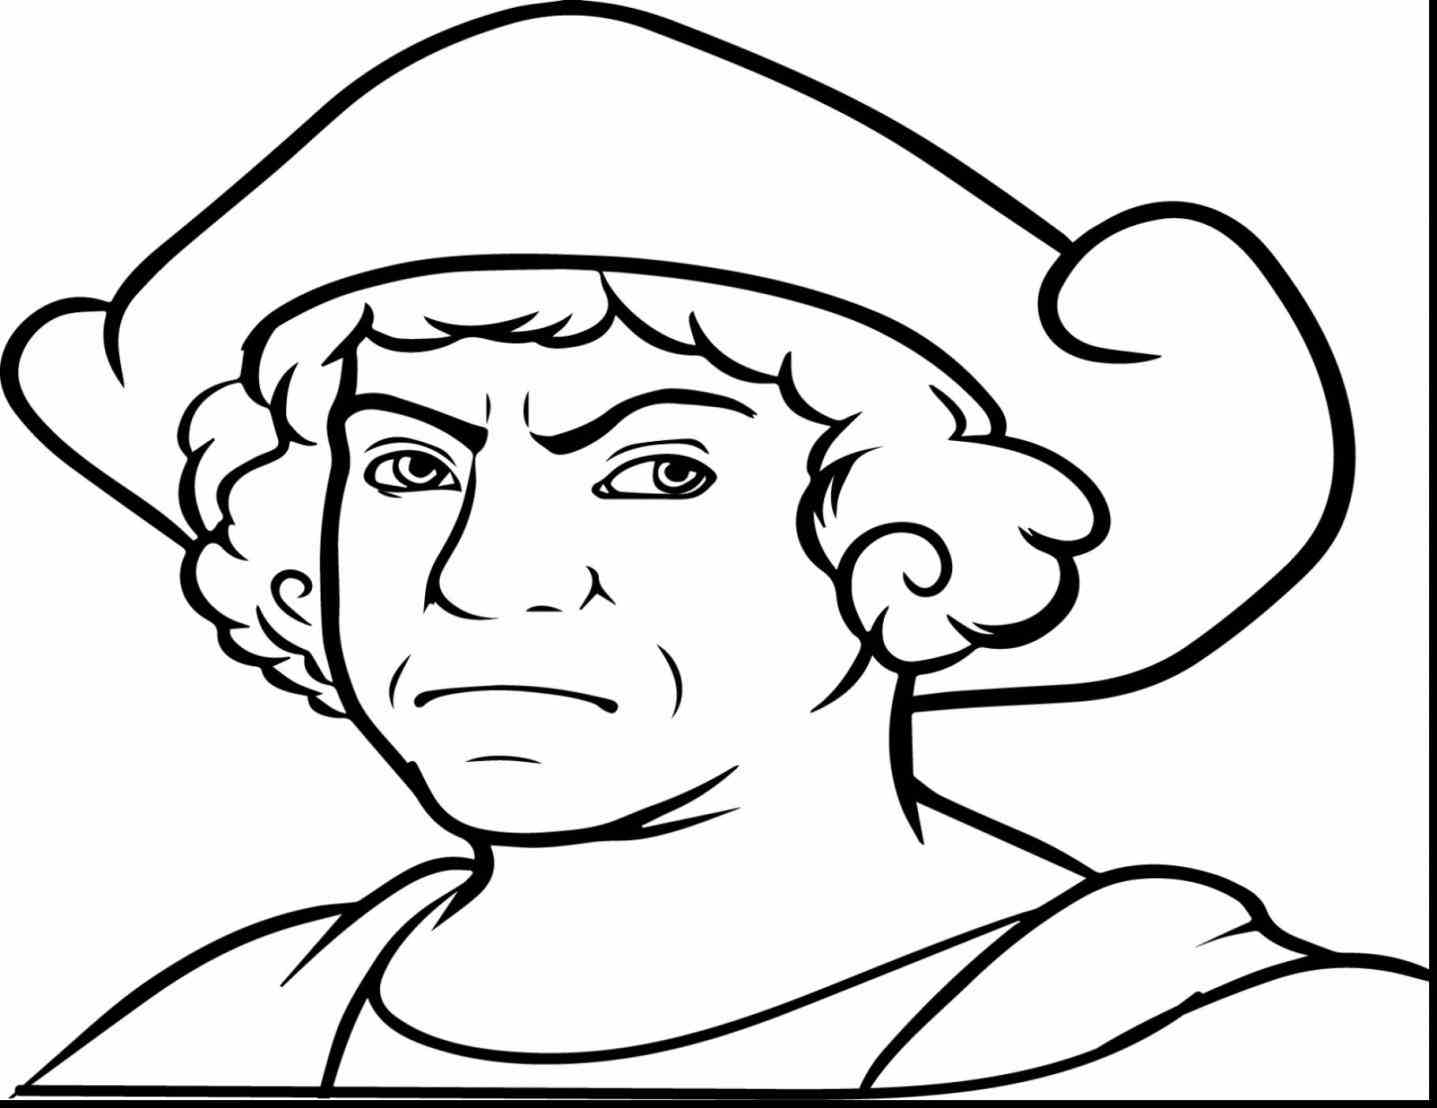 Christopher Columbus Coloring Pages Printable at GetColorings.com ...